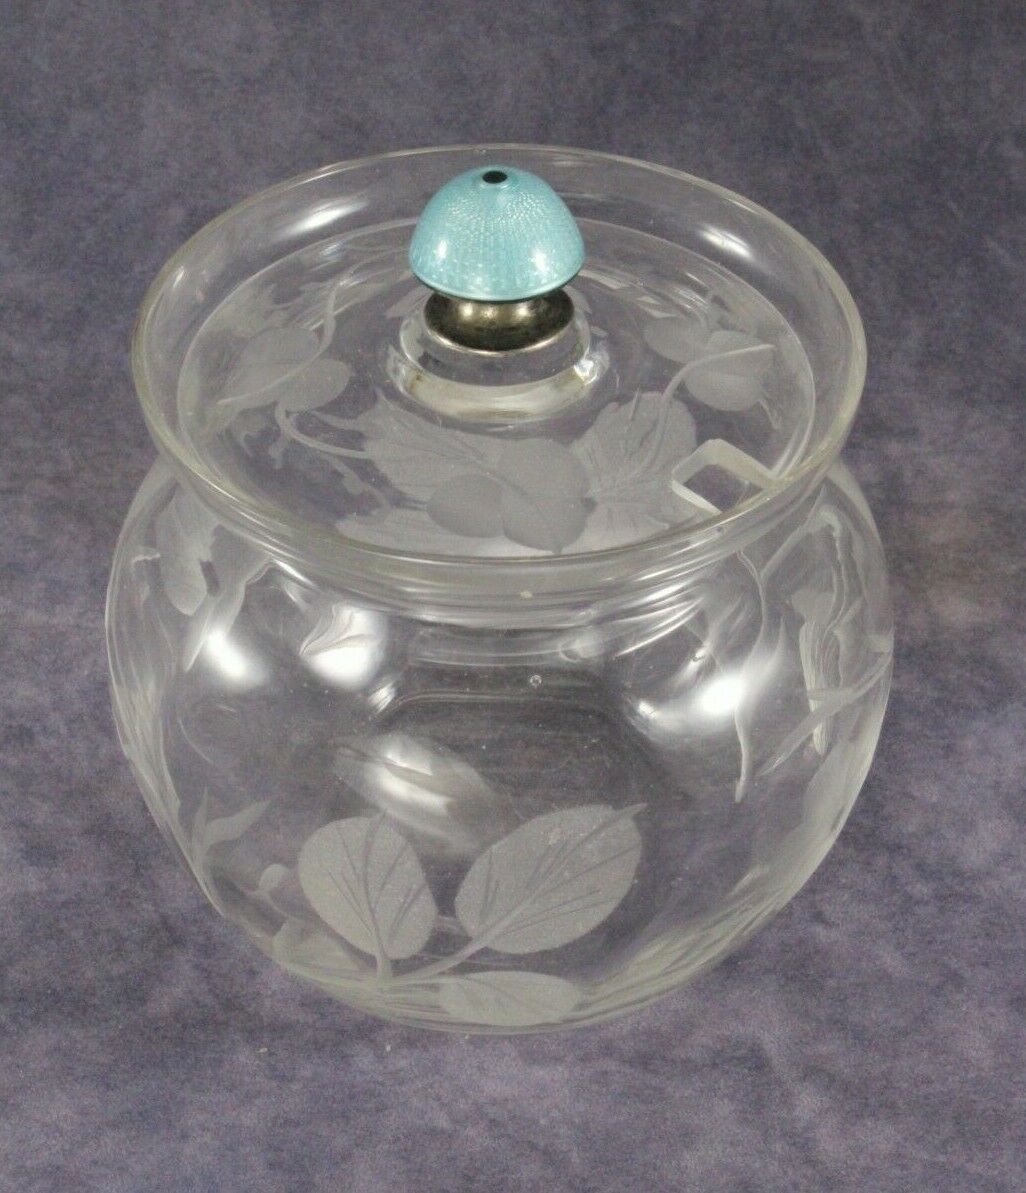 Vintage Sterling Silver And Enamel Guilloche Marmalade Or Jam Jar - Etched